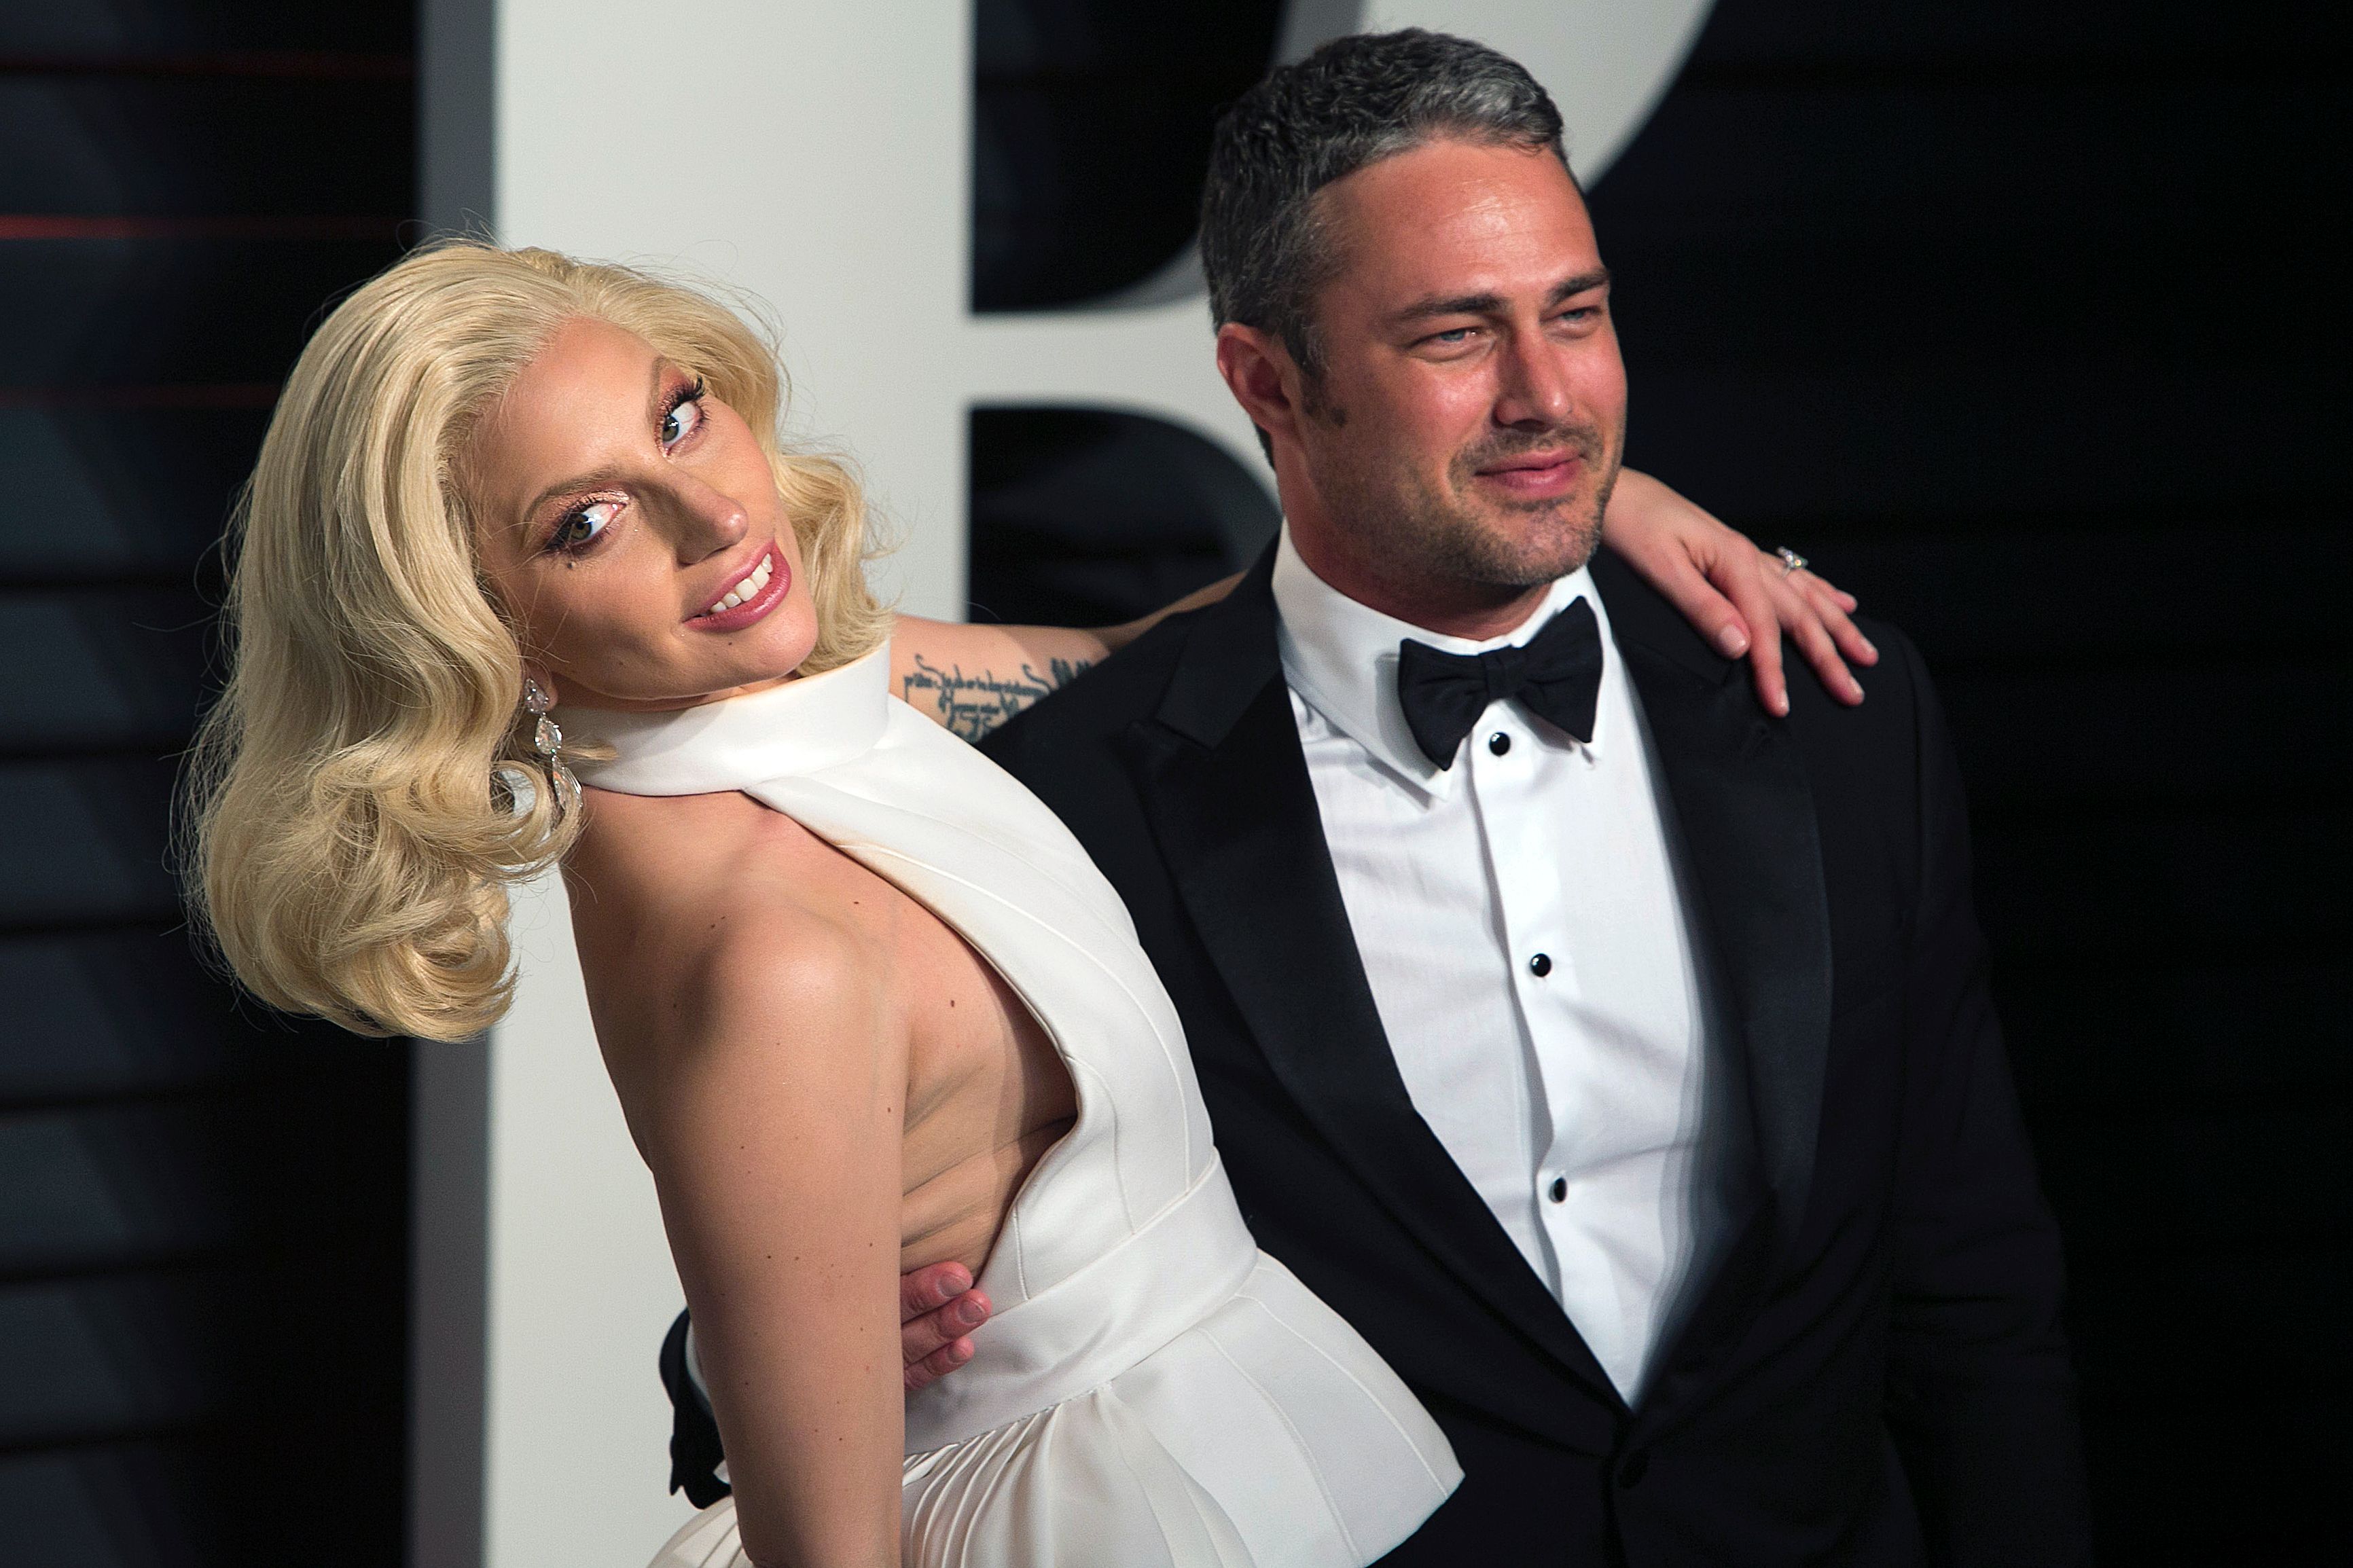 Dating who gaga is now lady Who's Lady